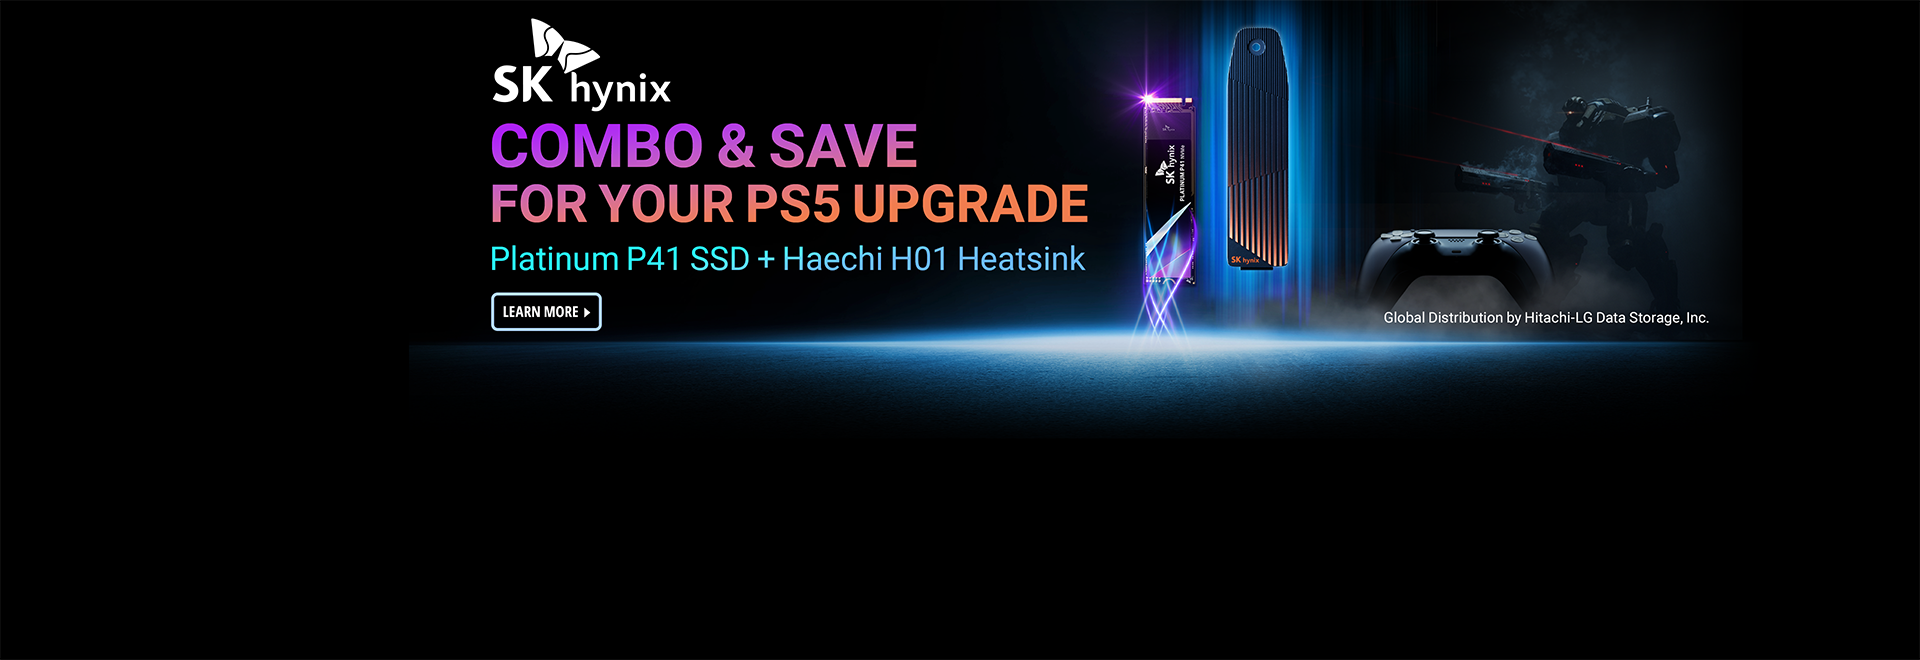 Combo & Save For Your PS5 Upgrade